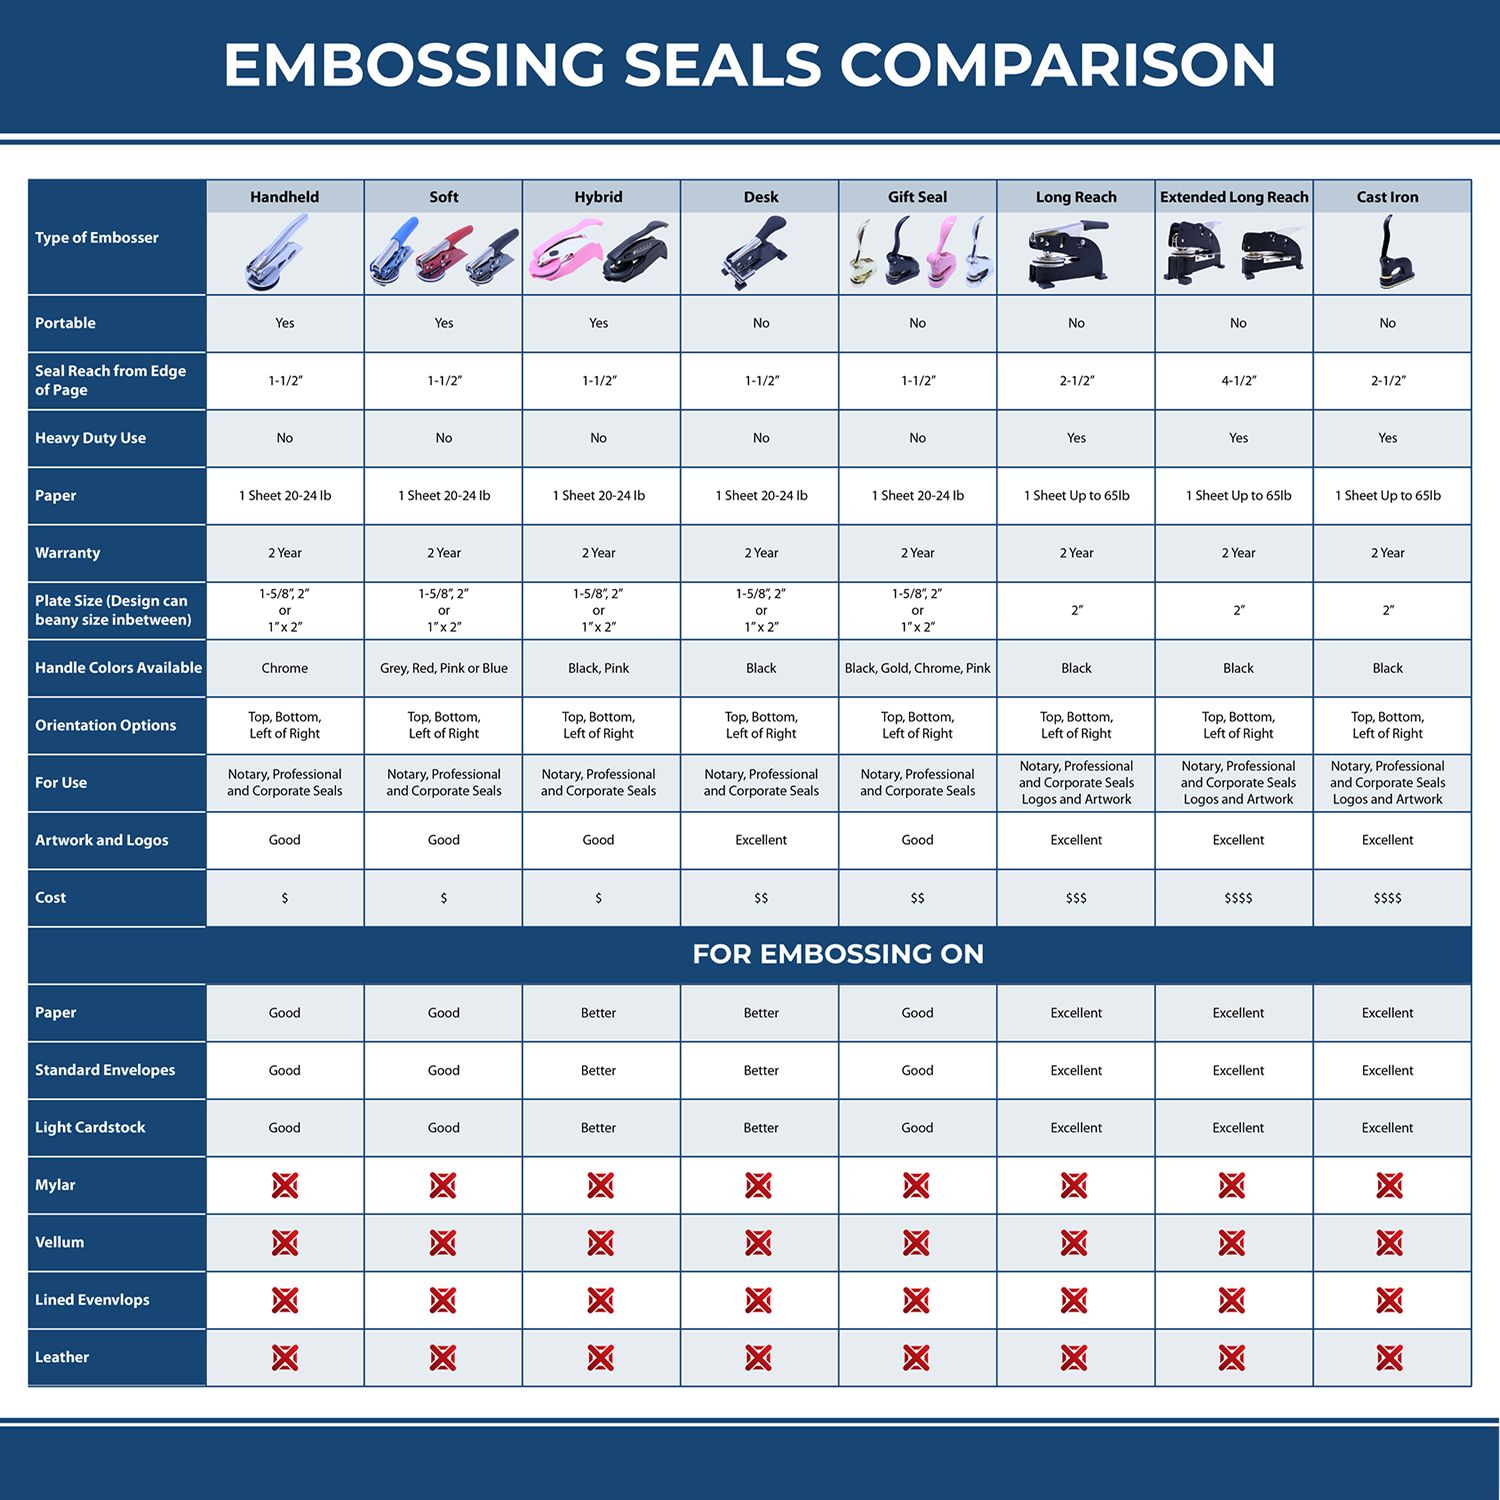 A comparison chart for the different types of mount models available for the Oregon Engineer Desk Seal.